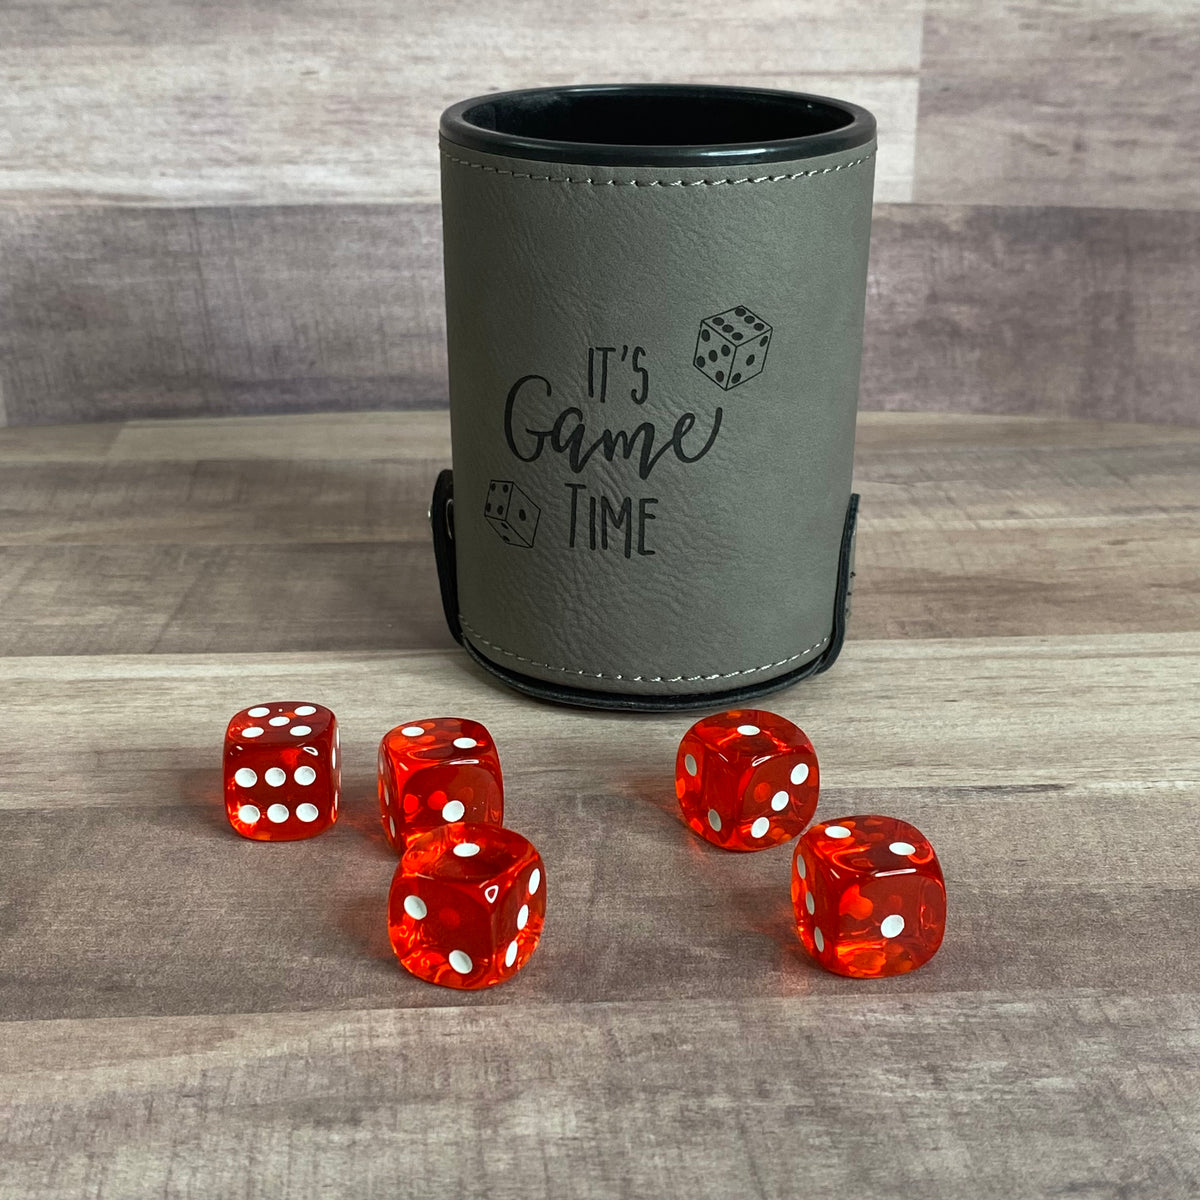 gray dice cup with red dice on table